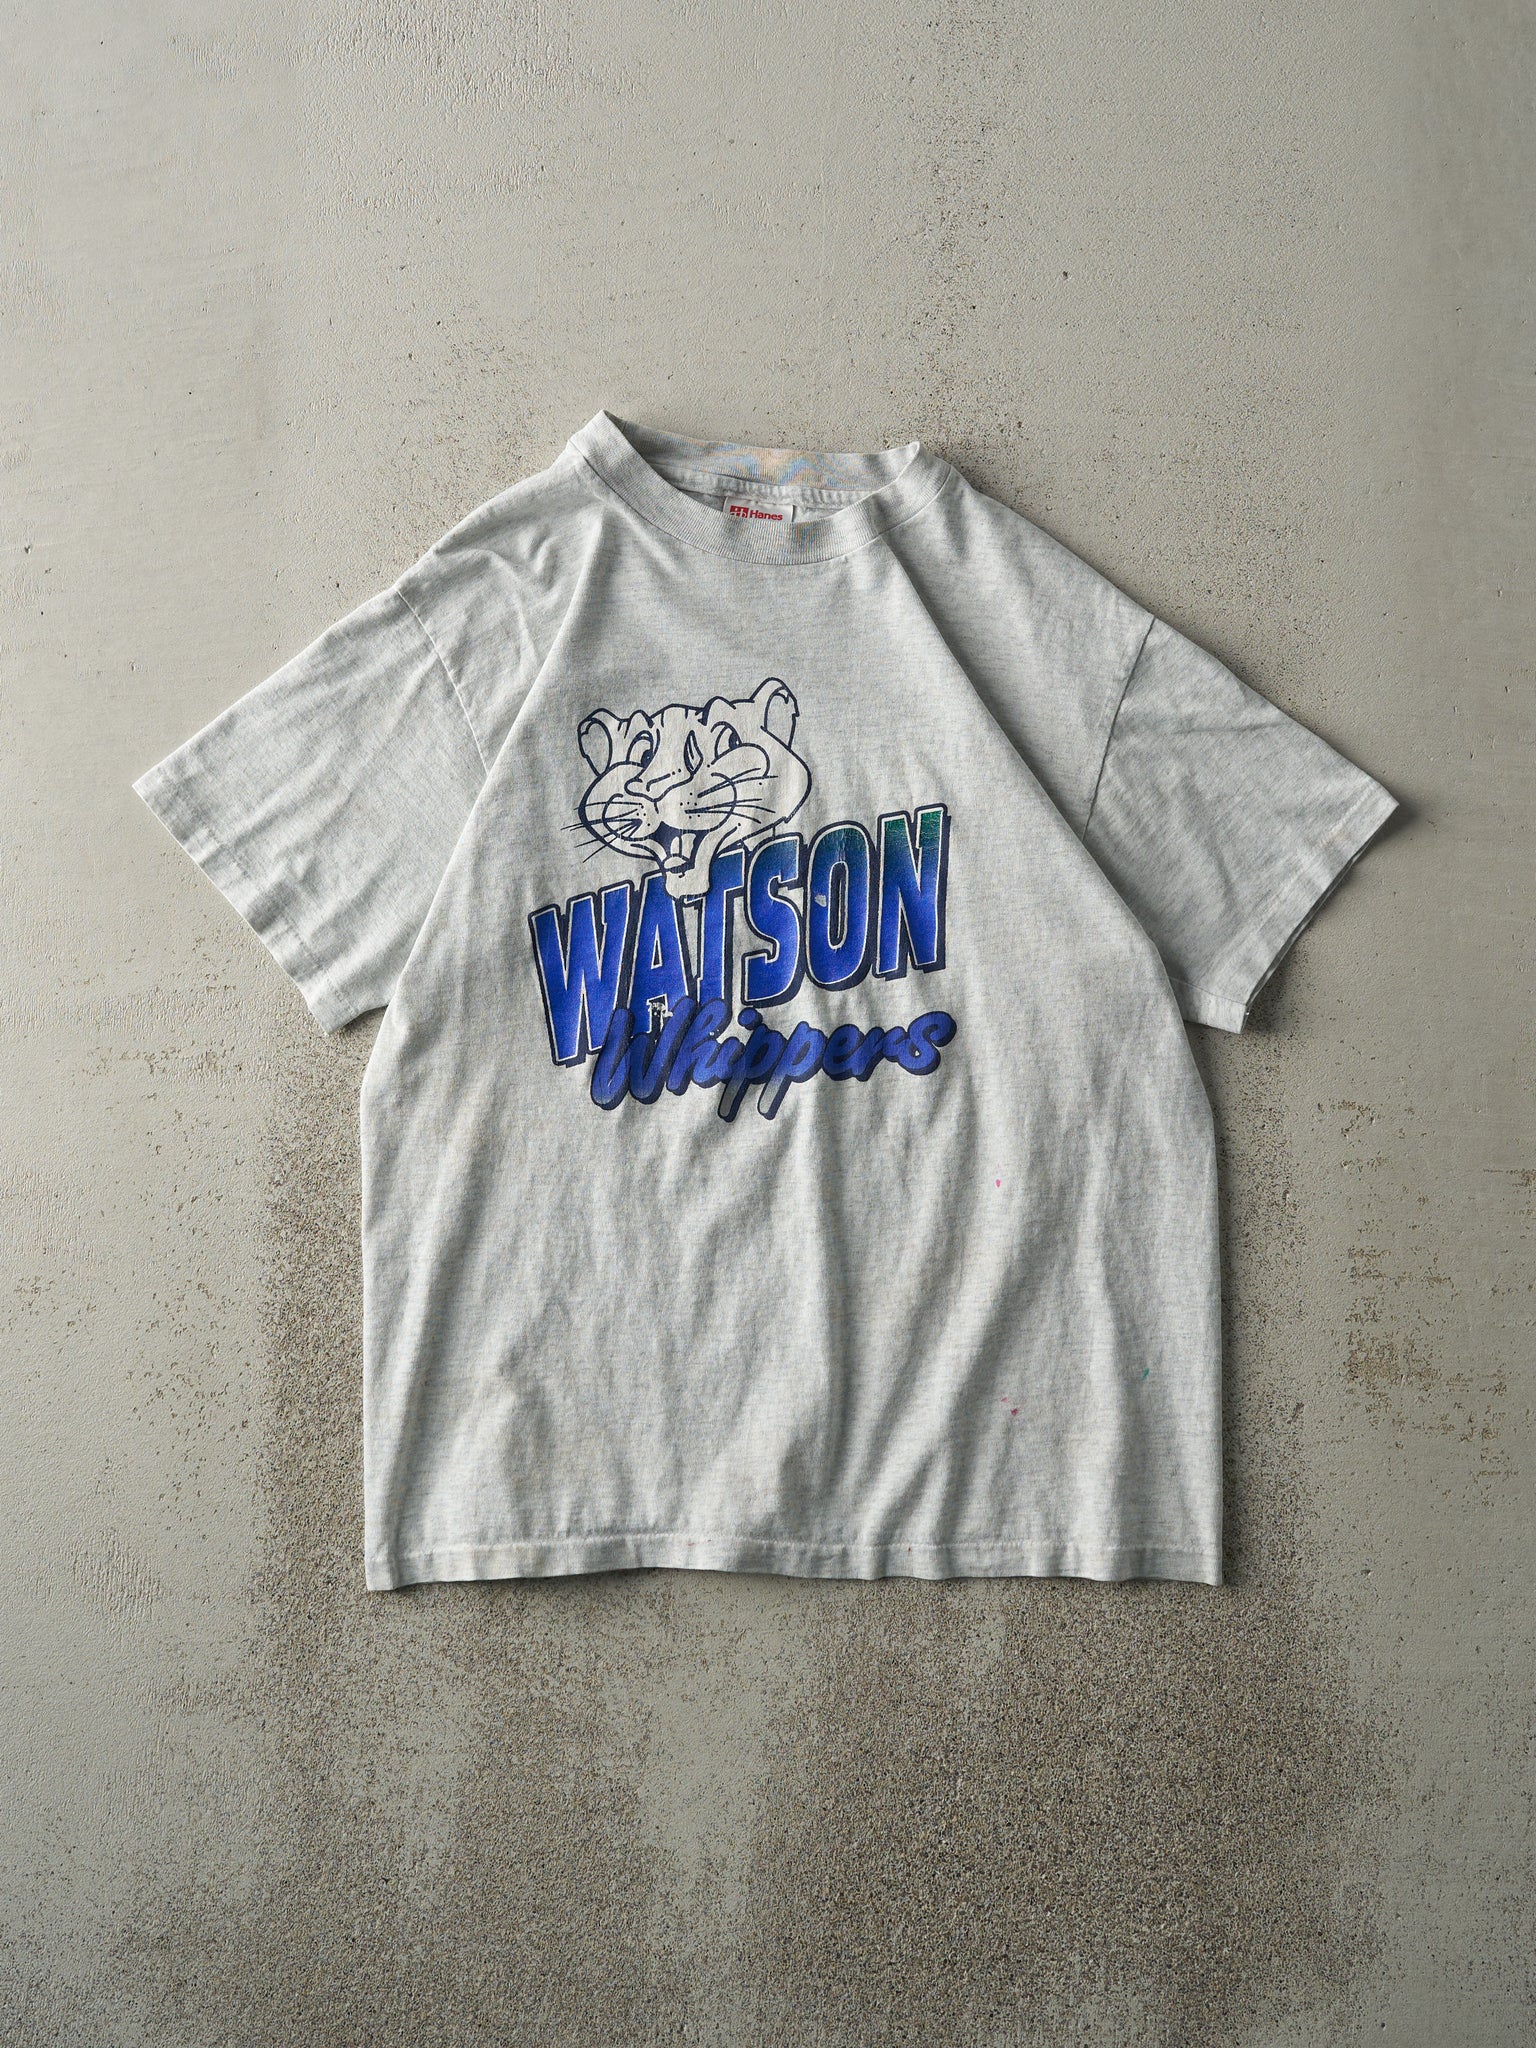 Vintage 90s Heather Grey Watson Whippers Single Stitch Tee (S)